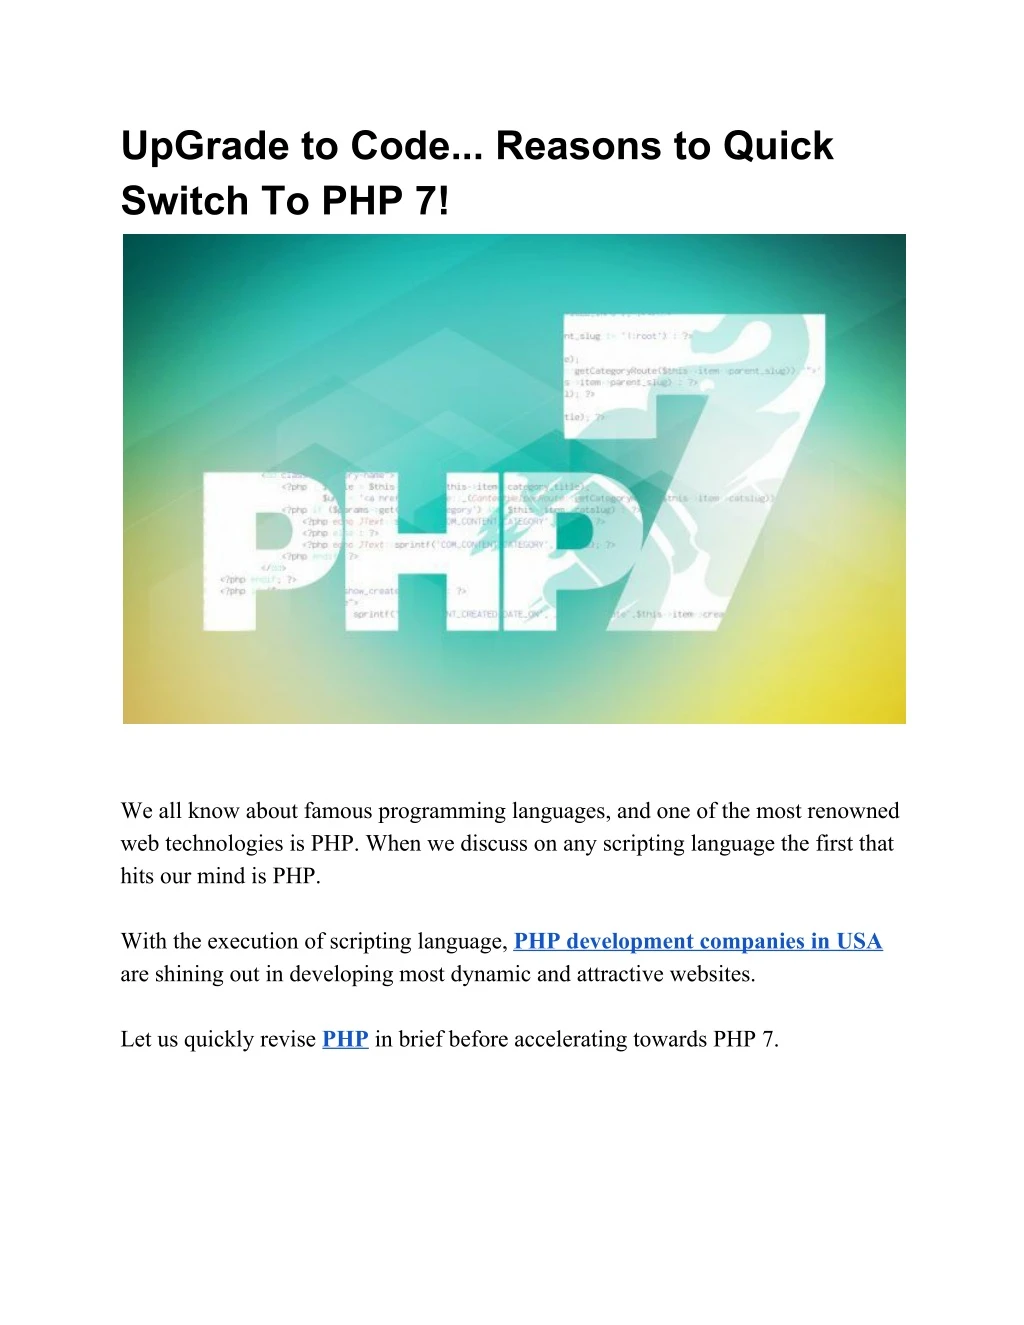 upgrade to code reasons to quick switch to php 7